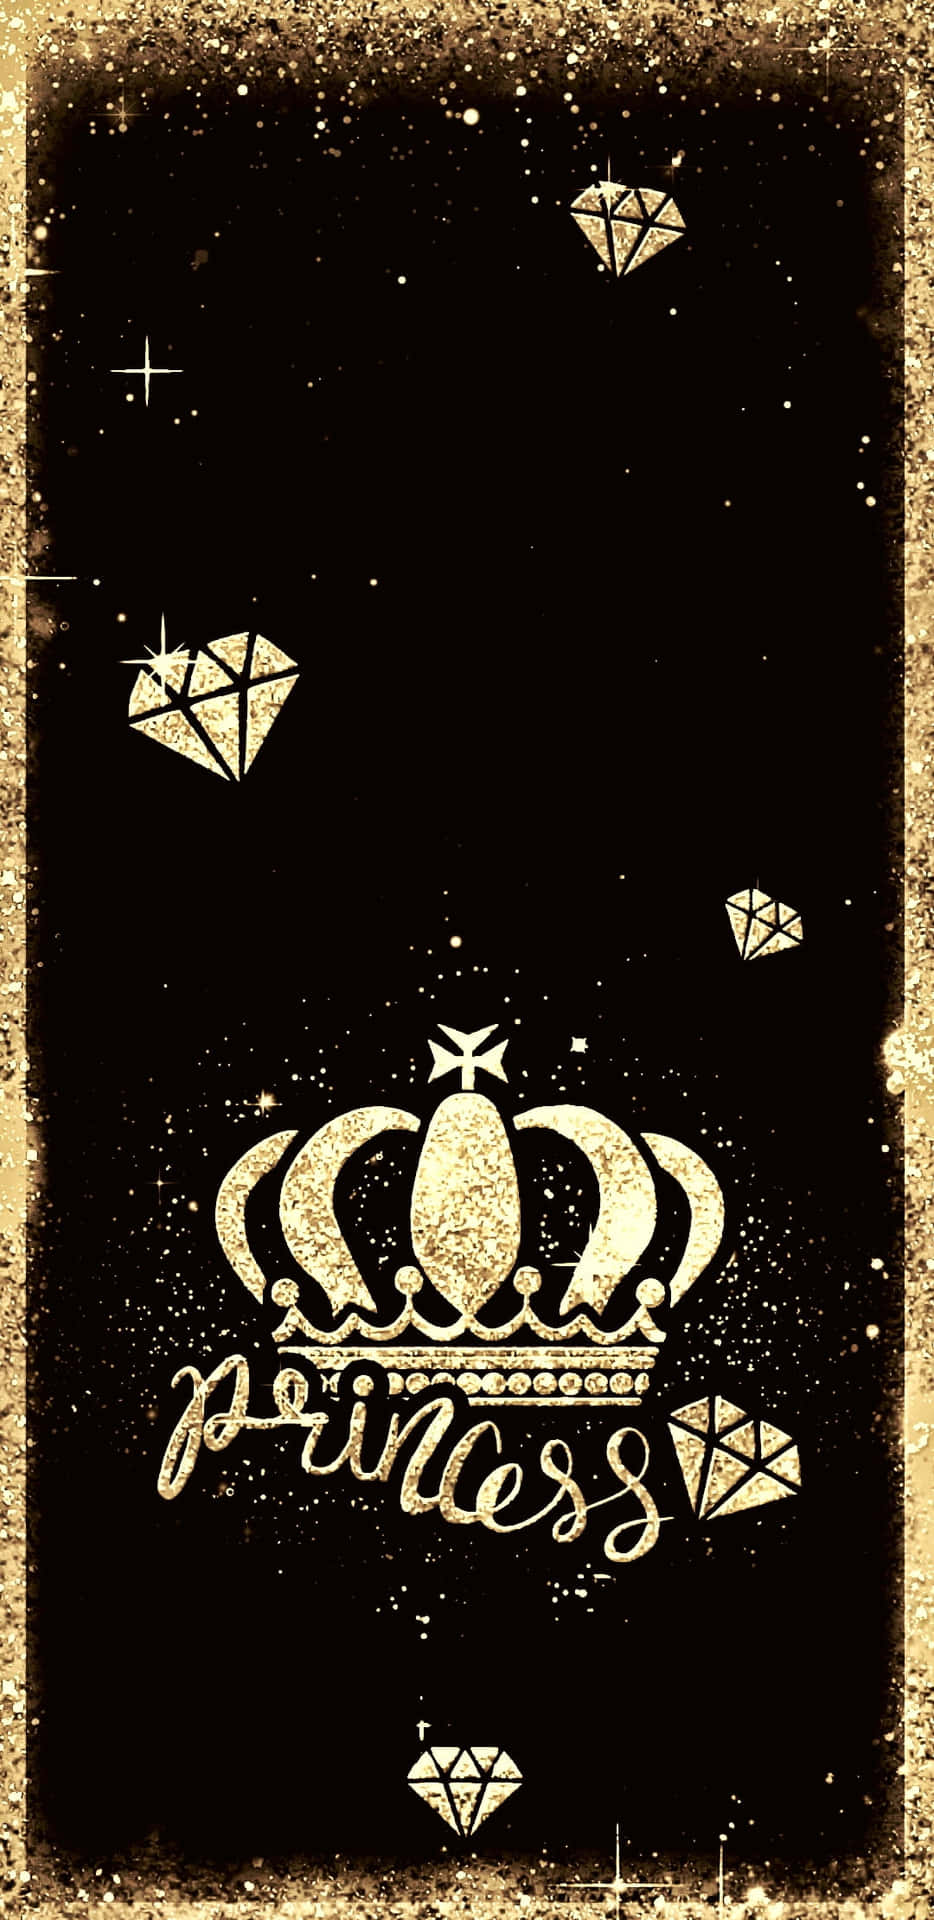 Shine bright with a golden princess crown! Wallpaper